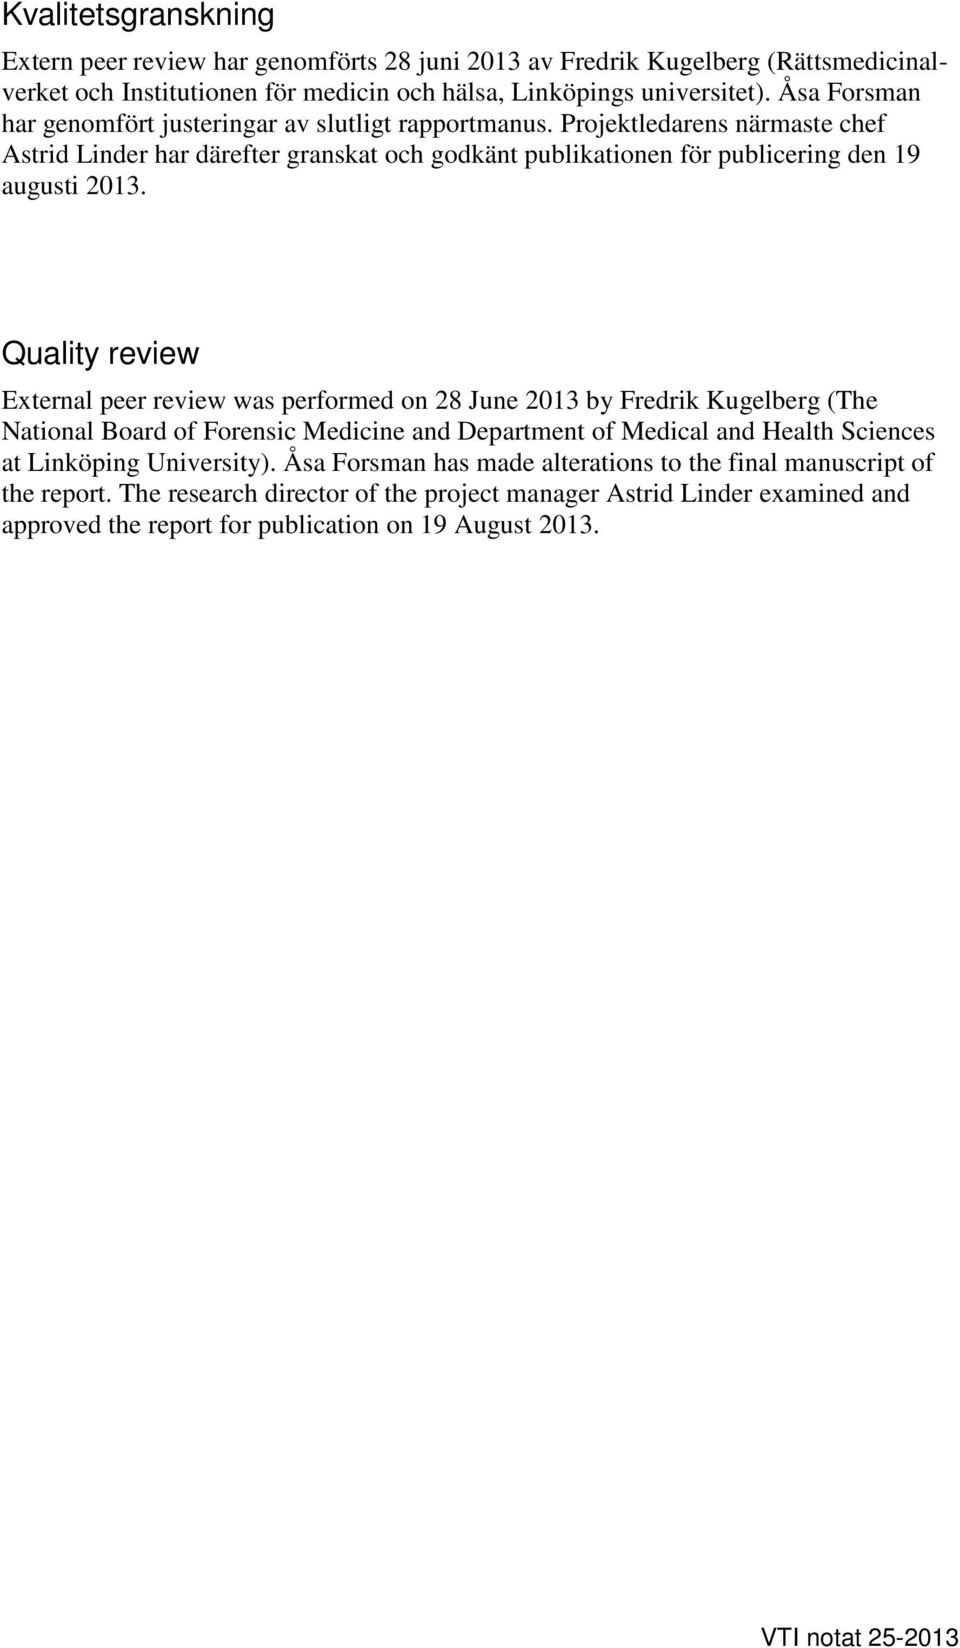 Quality review External peer review was performed on 28 June 2013 by Fredrik Kugelberg (The National Board of Forensic Medicine and Department of Medical and Health Sciences at Linköping